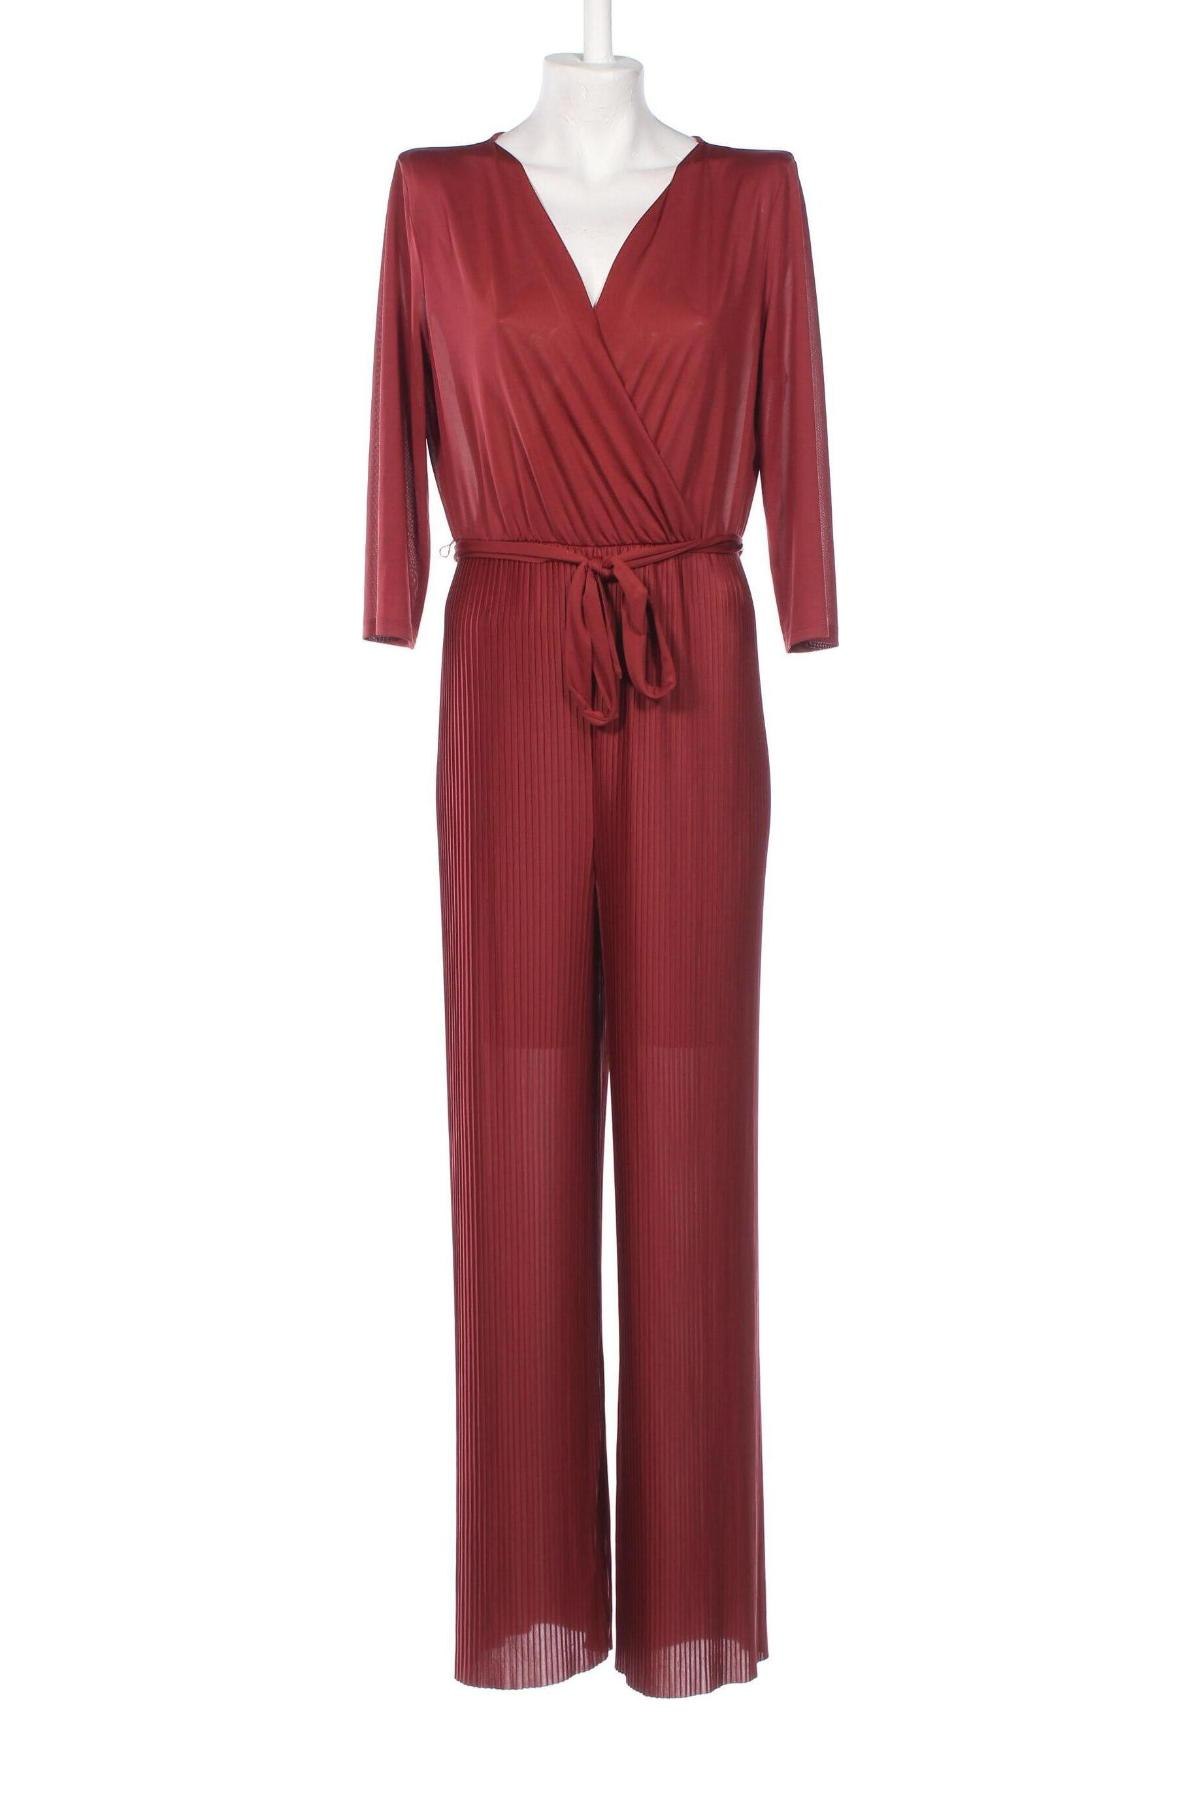 Damen Overall About You, Größe XL, Farbe Rot, Preis 14,38 €